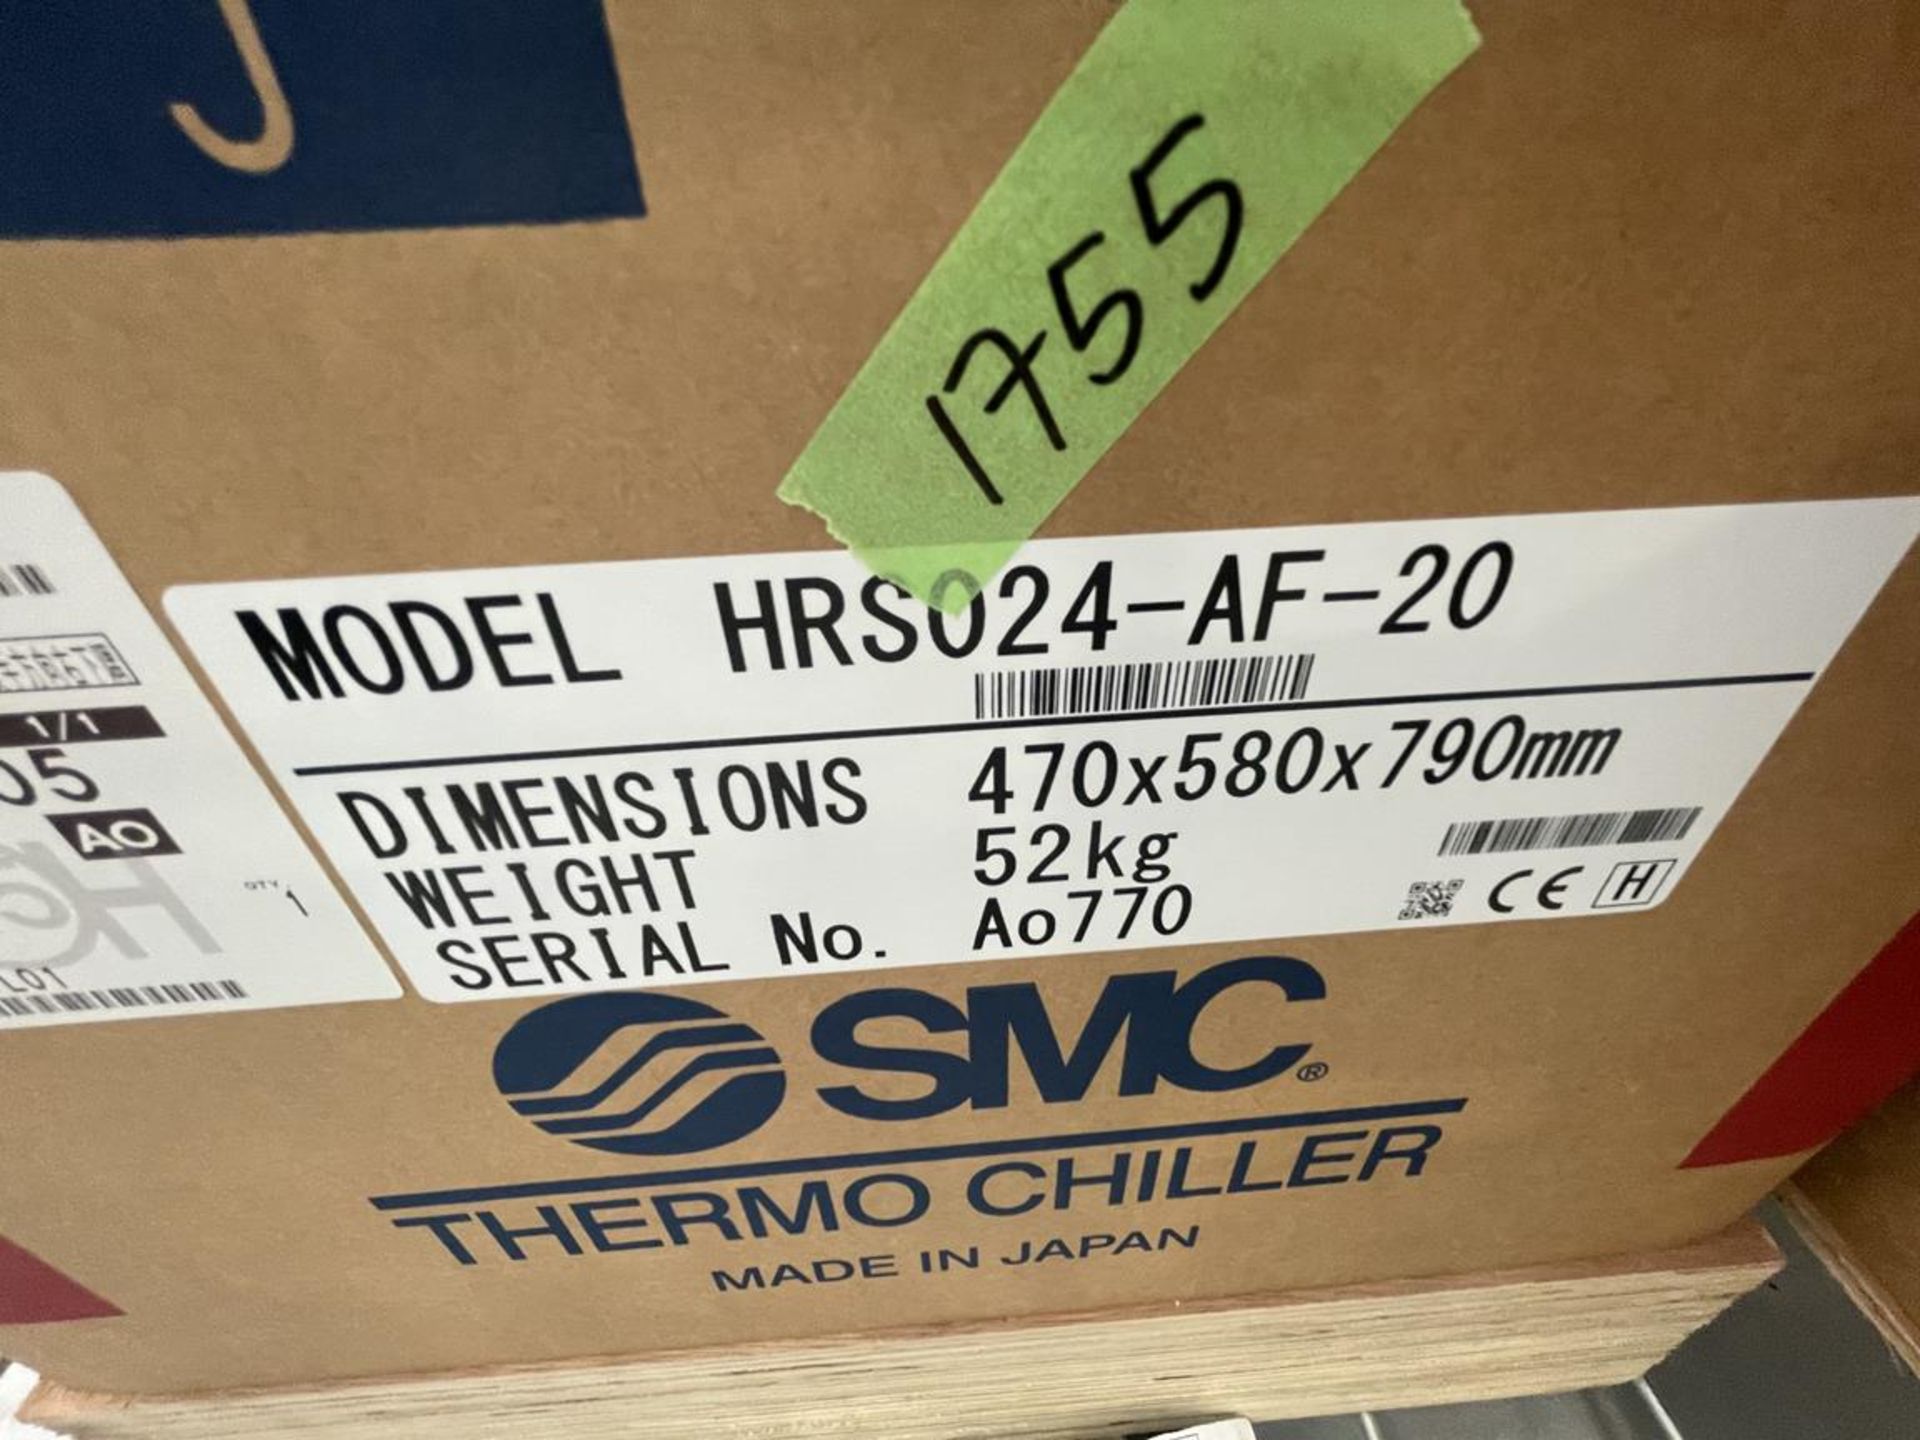 SMC, HRS024-AF-20 thermo chiller, Serial No. AO770 (DOM: 2021) (boxed and unused) - Image 3 of 3